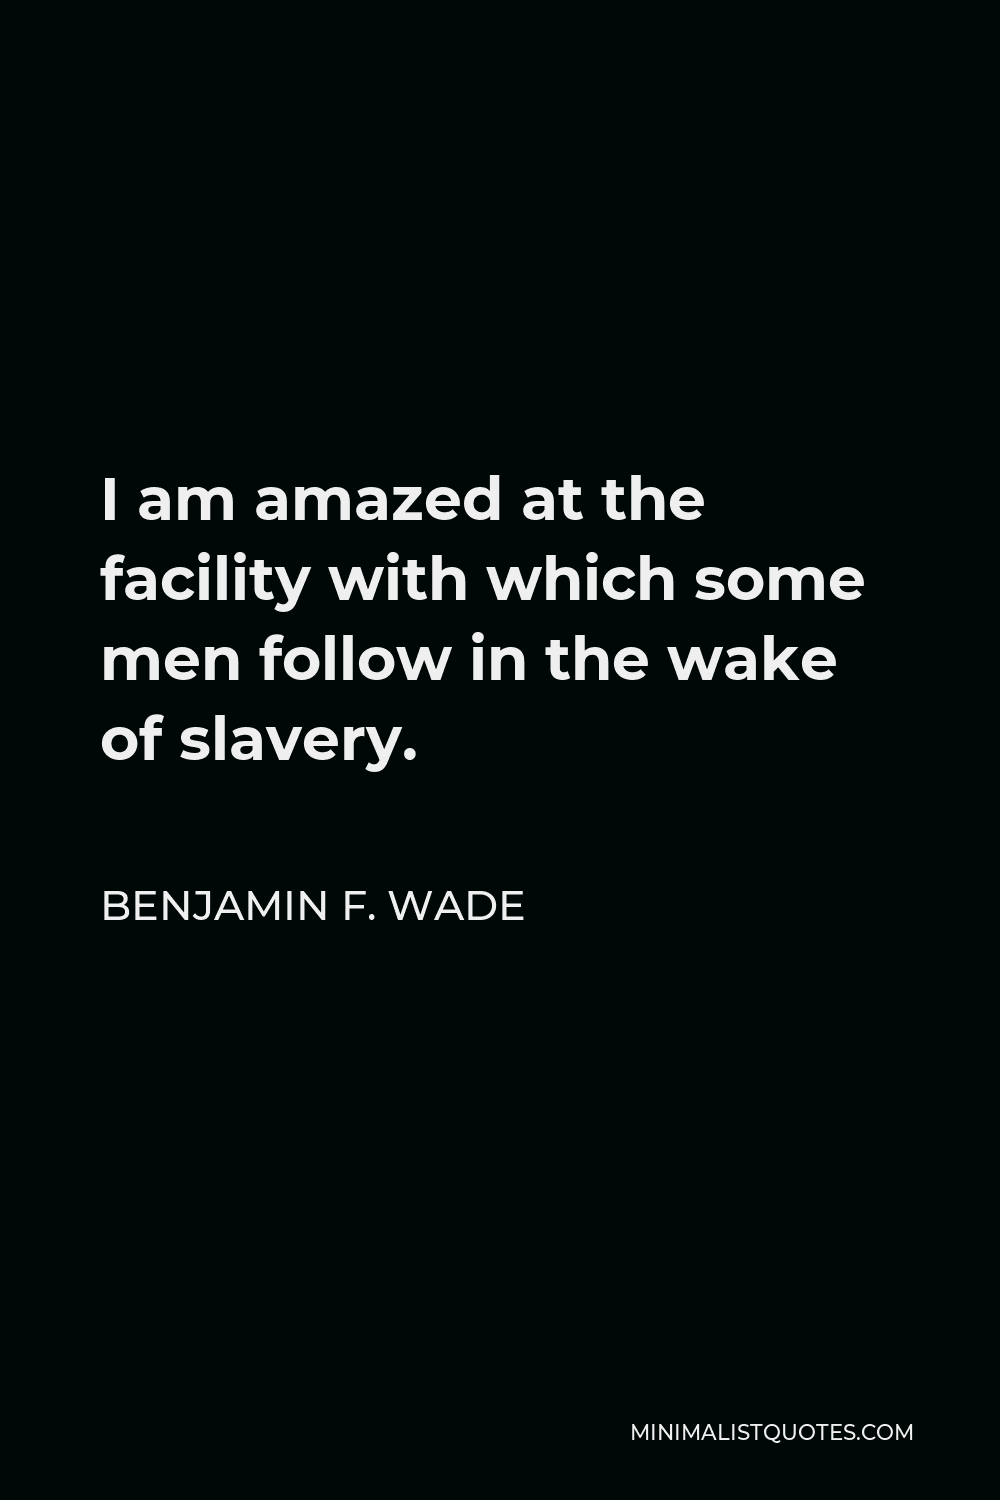 Benjamin F. Wade Quote - I am amazed at the facility with which some men follow in the wake of slavery.